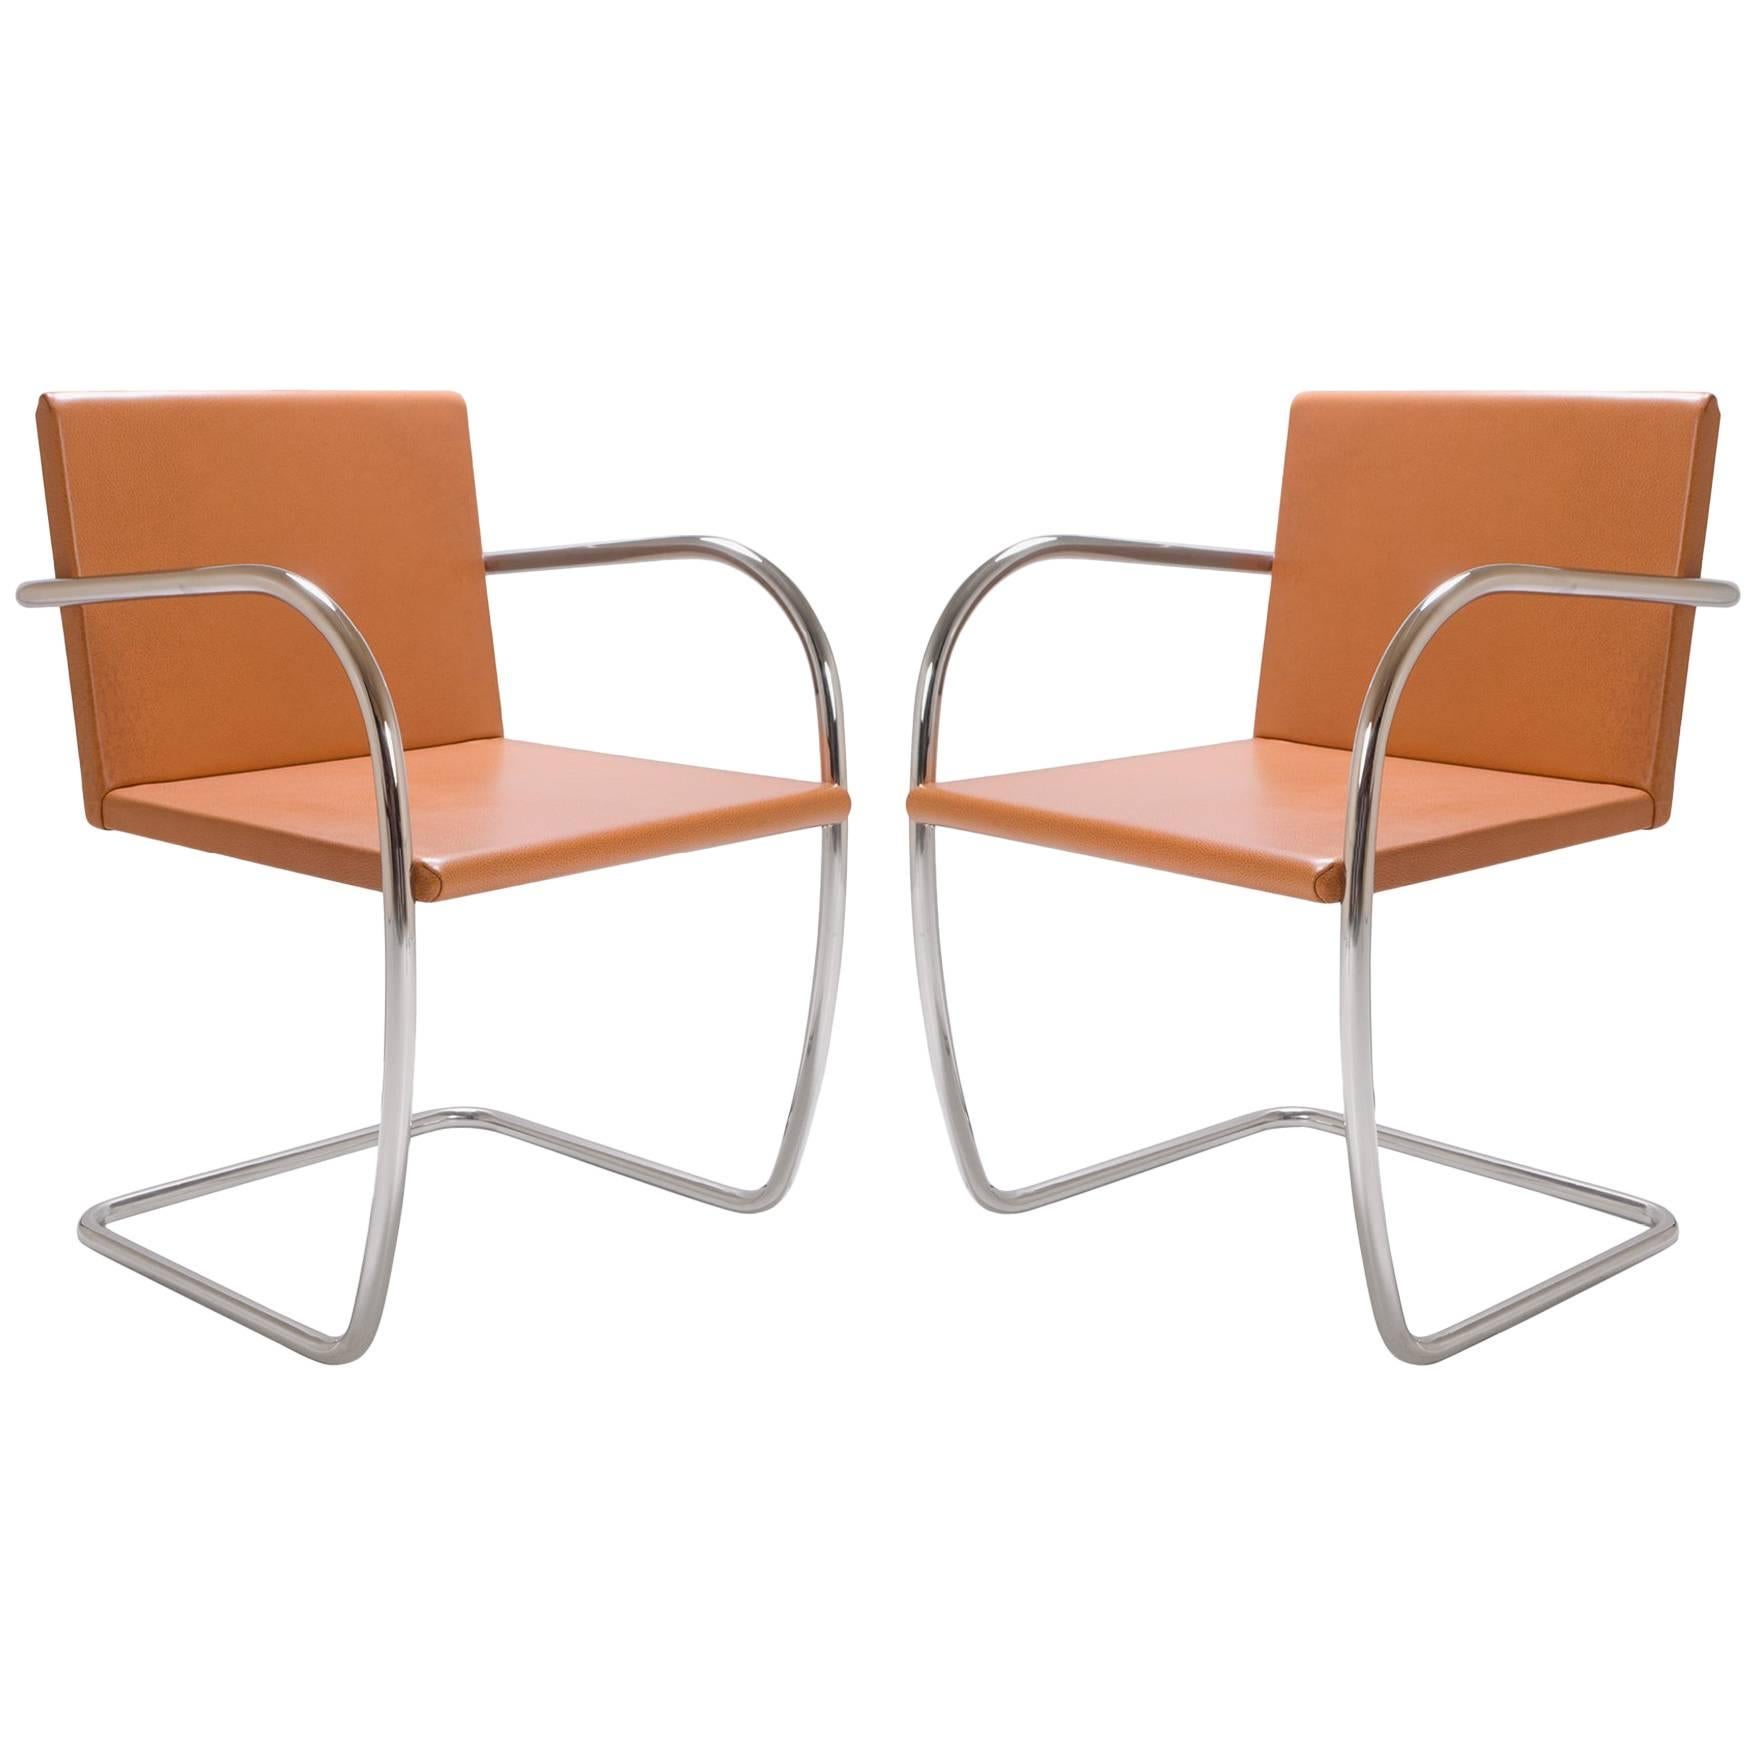 Mies Van Der Rohe for Knoll Brno Tubular Thin-Pad Chairs in Caramel Leather Pair